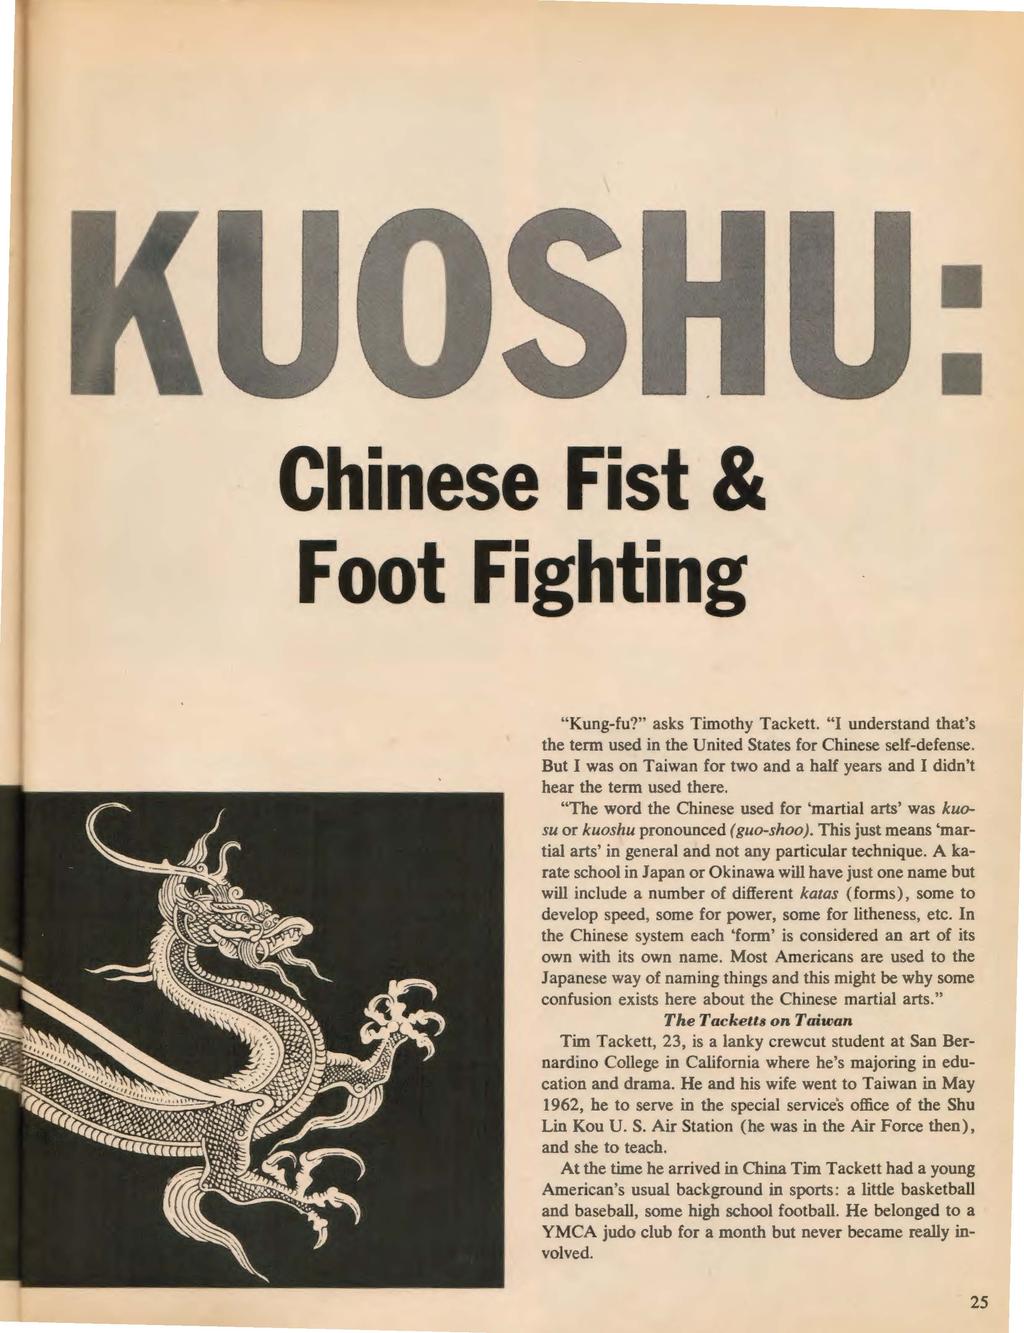 Chinese Fist & Foot Fighting "Kung-fu?" asks Timothy Tackett. "I understand that's the term used in the United States for Chinese self-defense.